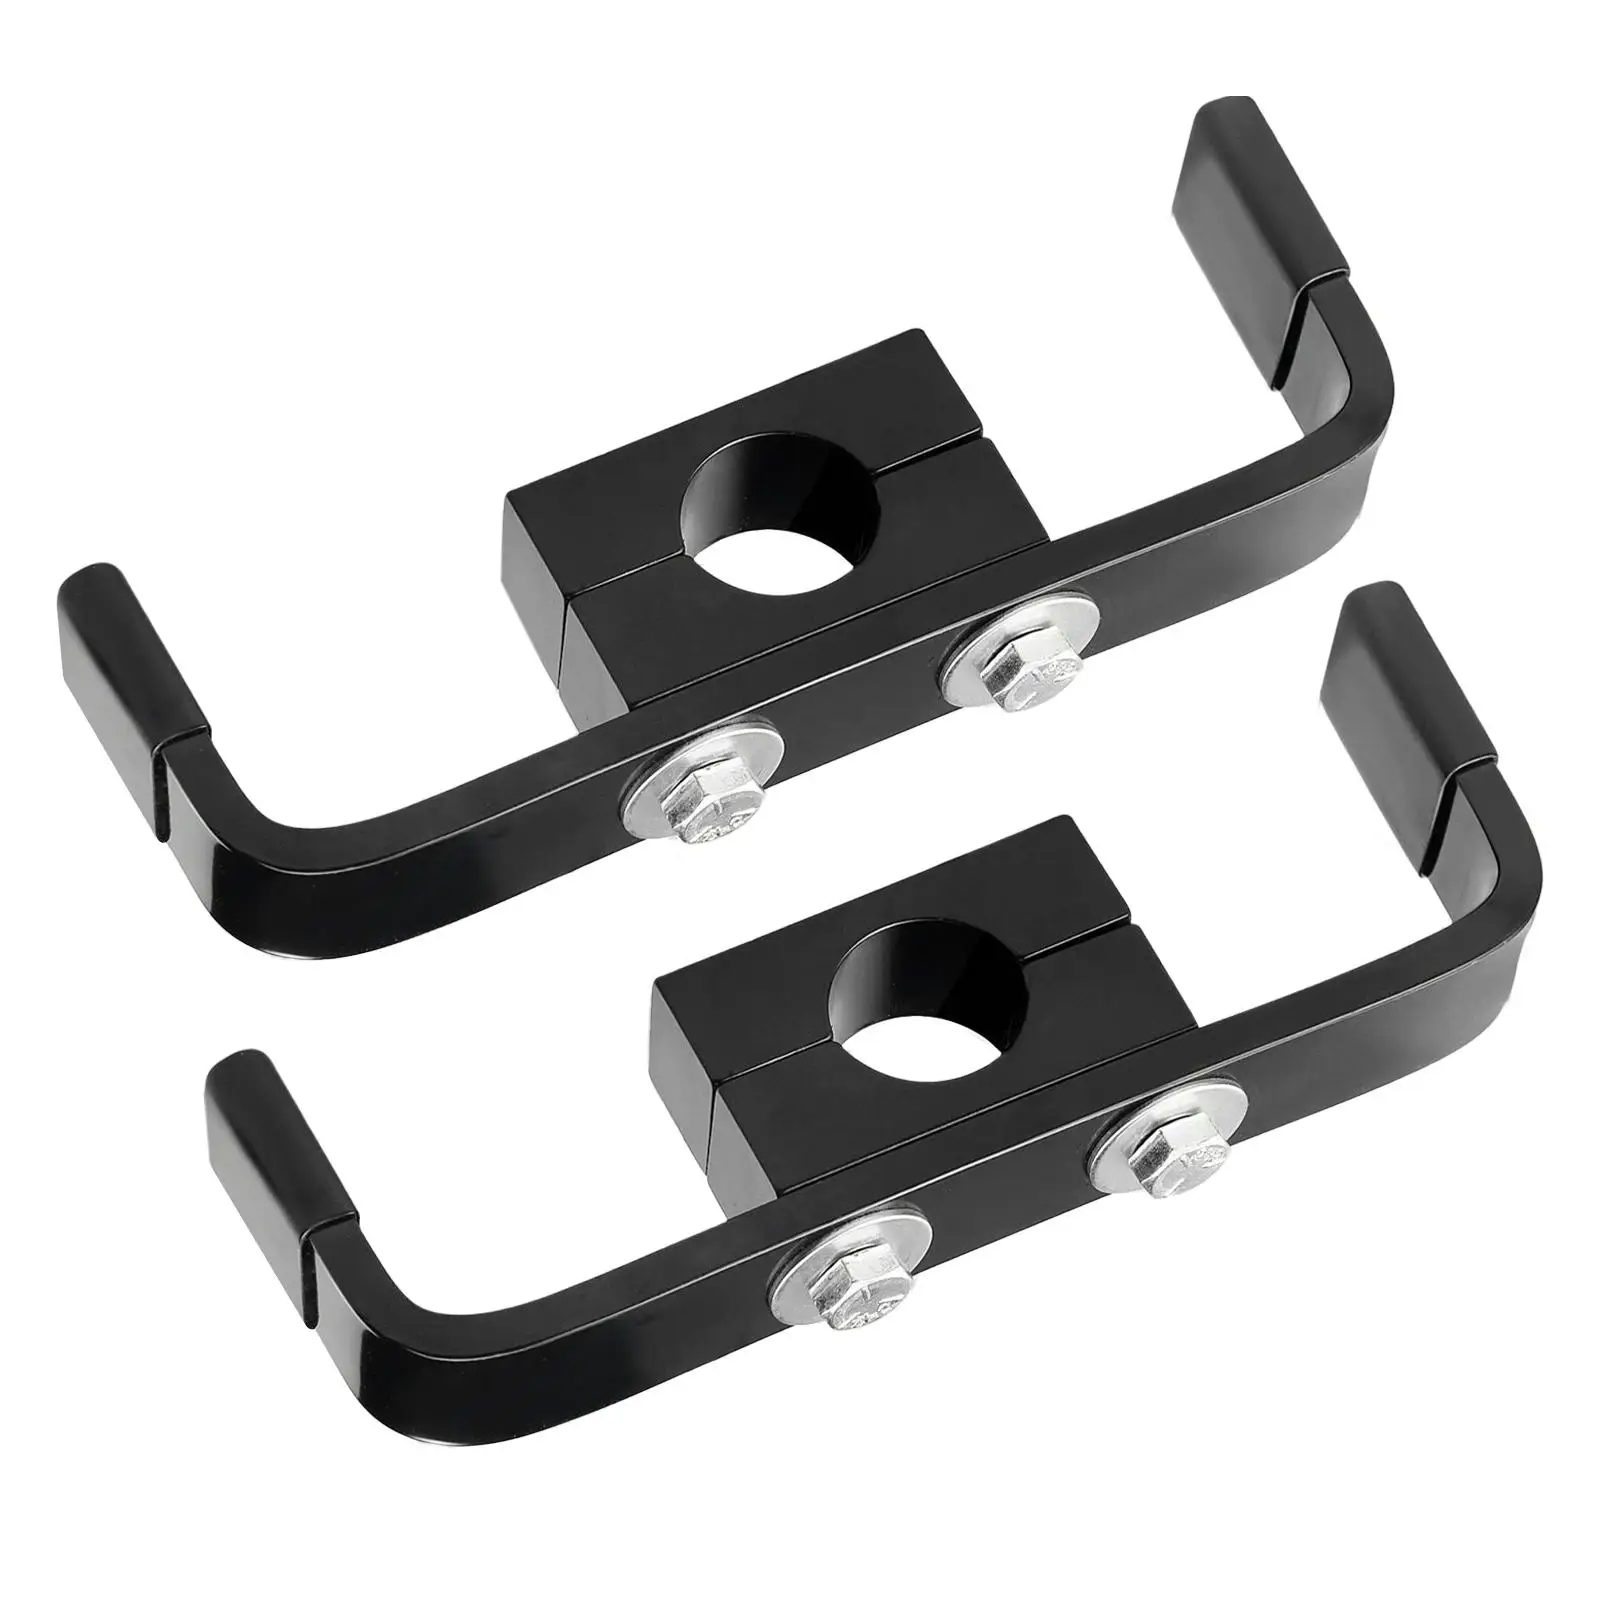 1 Pair Camshaft Holding Tool for Ford F Series Direct Replaces Accessory Automotive Premium